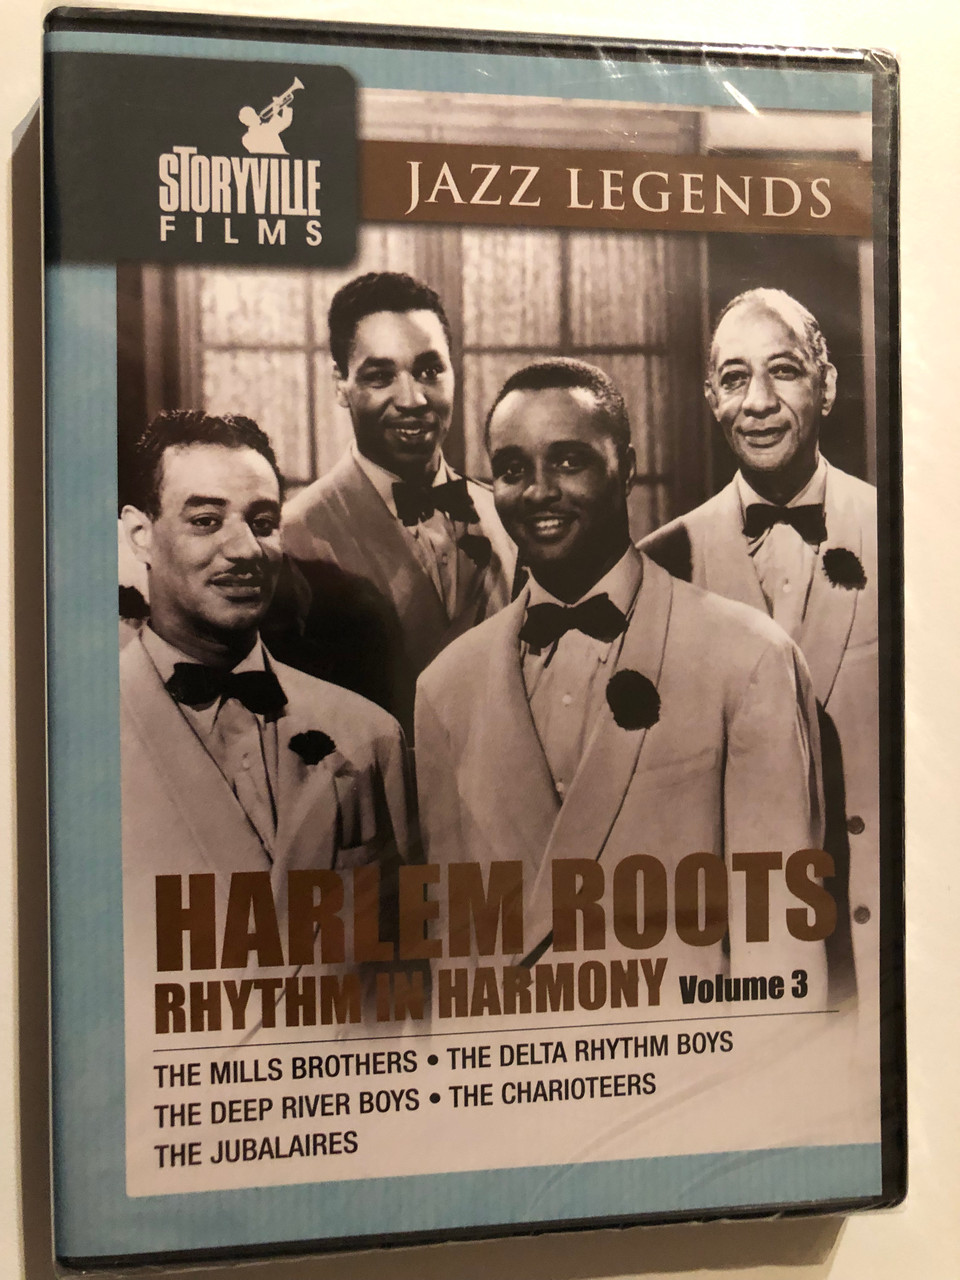 Harlem Roots, Vol. 3: Rhythm in Harmony / Jazz Legends / Storyville Films /  The Mills Brothers / The Delta Rhythm Boys / The Deep River Boys / The  Charioteers / The Jubalaires / 2008 DVD - bibleinmylanguage